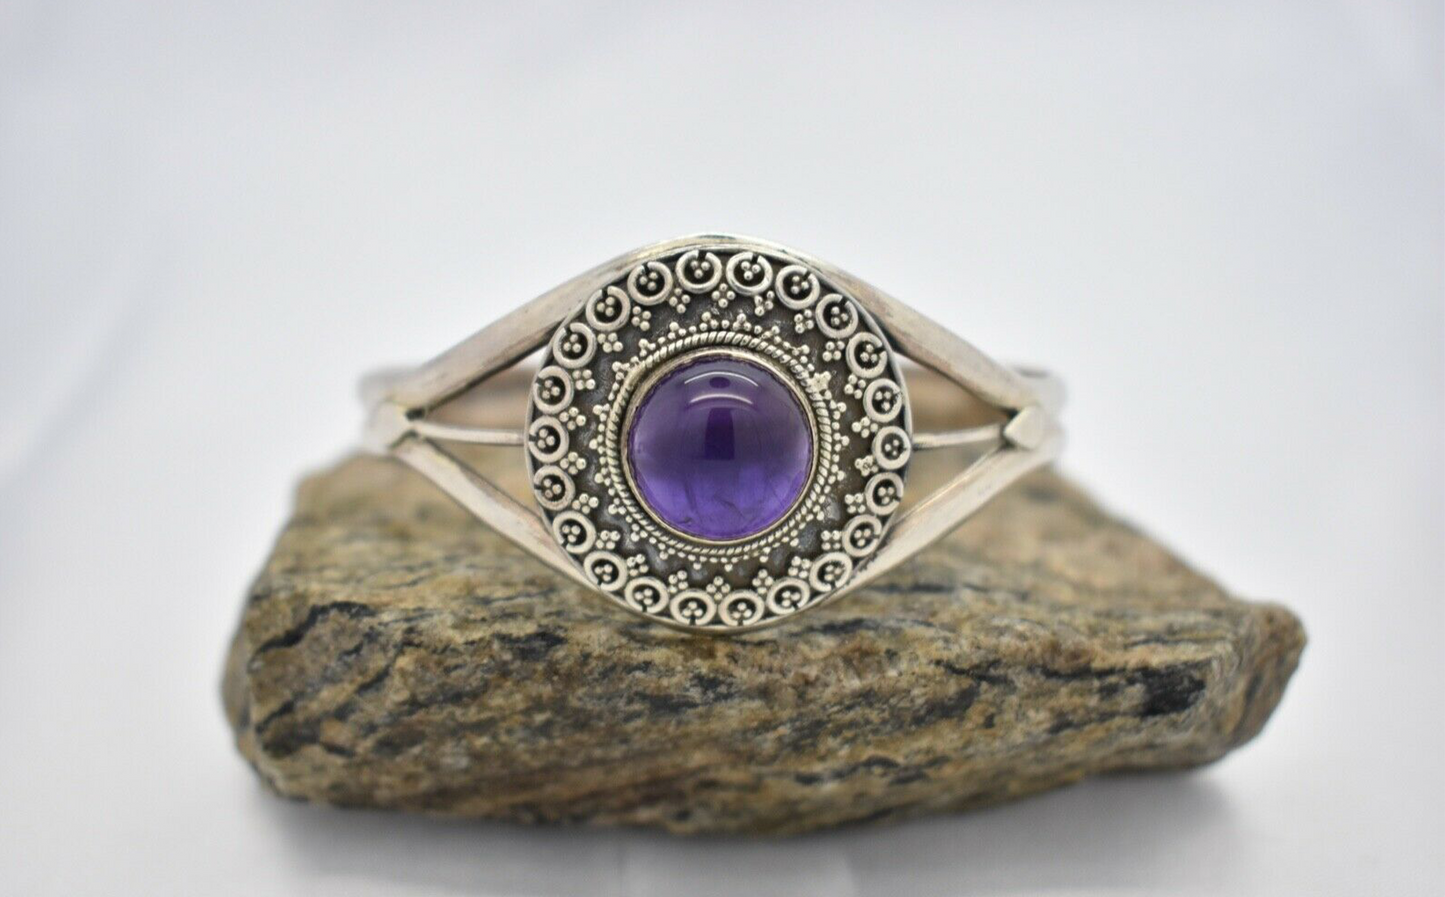 Sterling Silver Amethyst Cuff Bracelet, 7.5 inches (Adjustable) - 26.1g